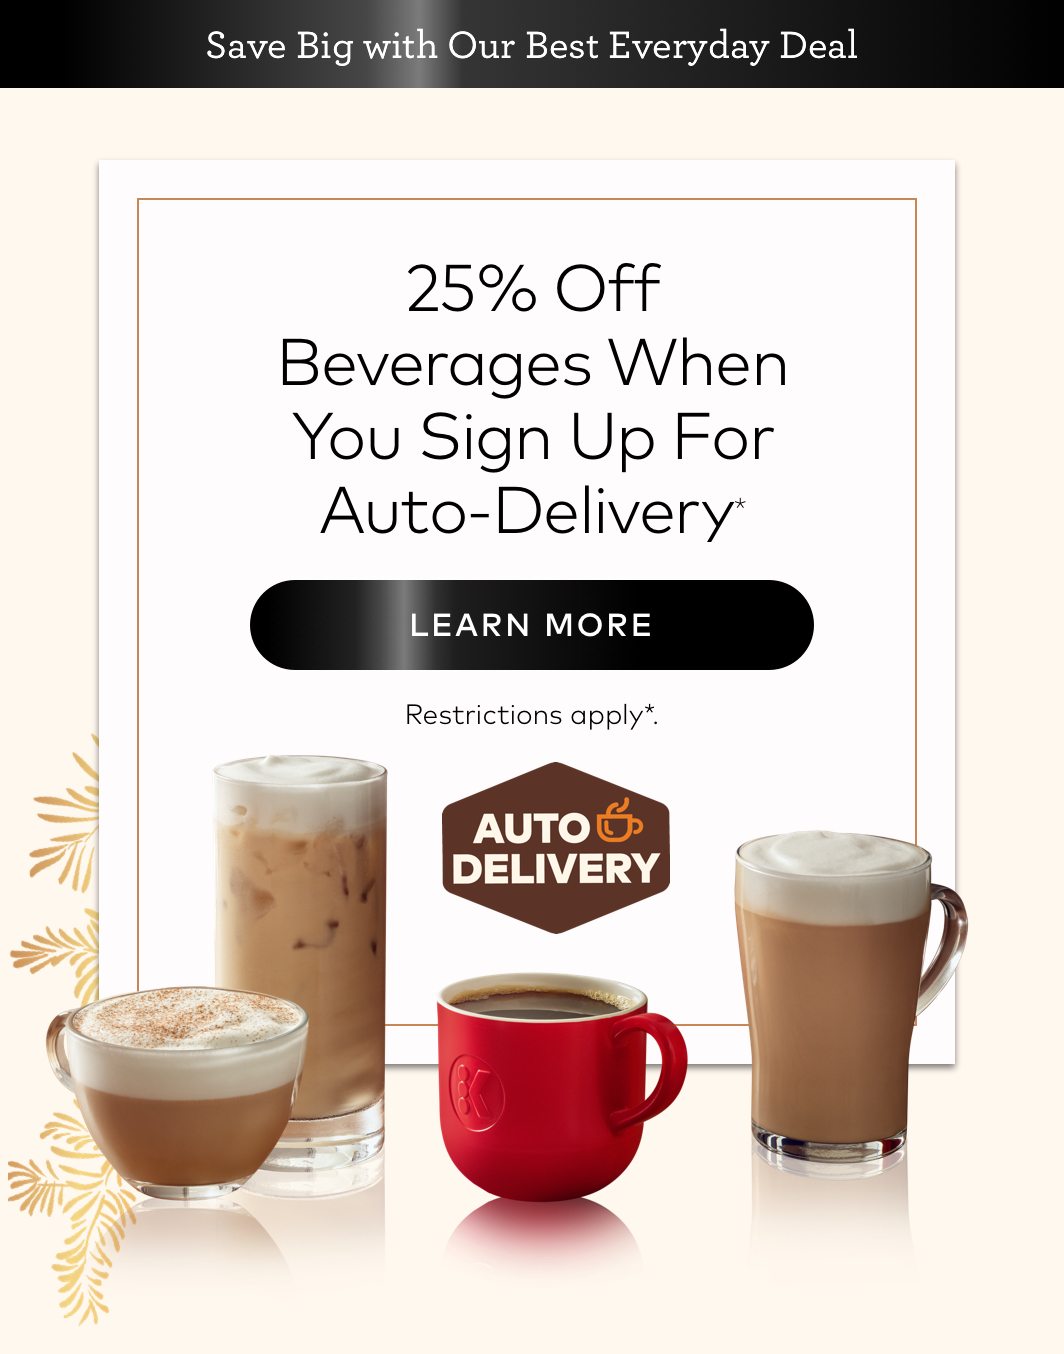 25% off beverages and select accessories with Auto-Delivery